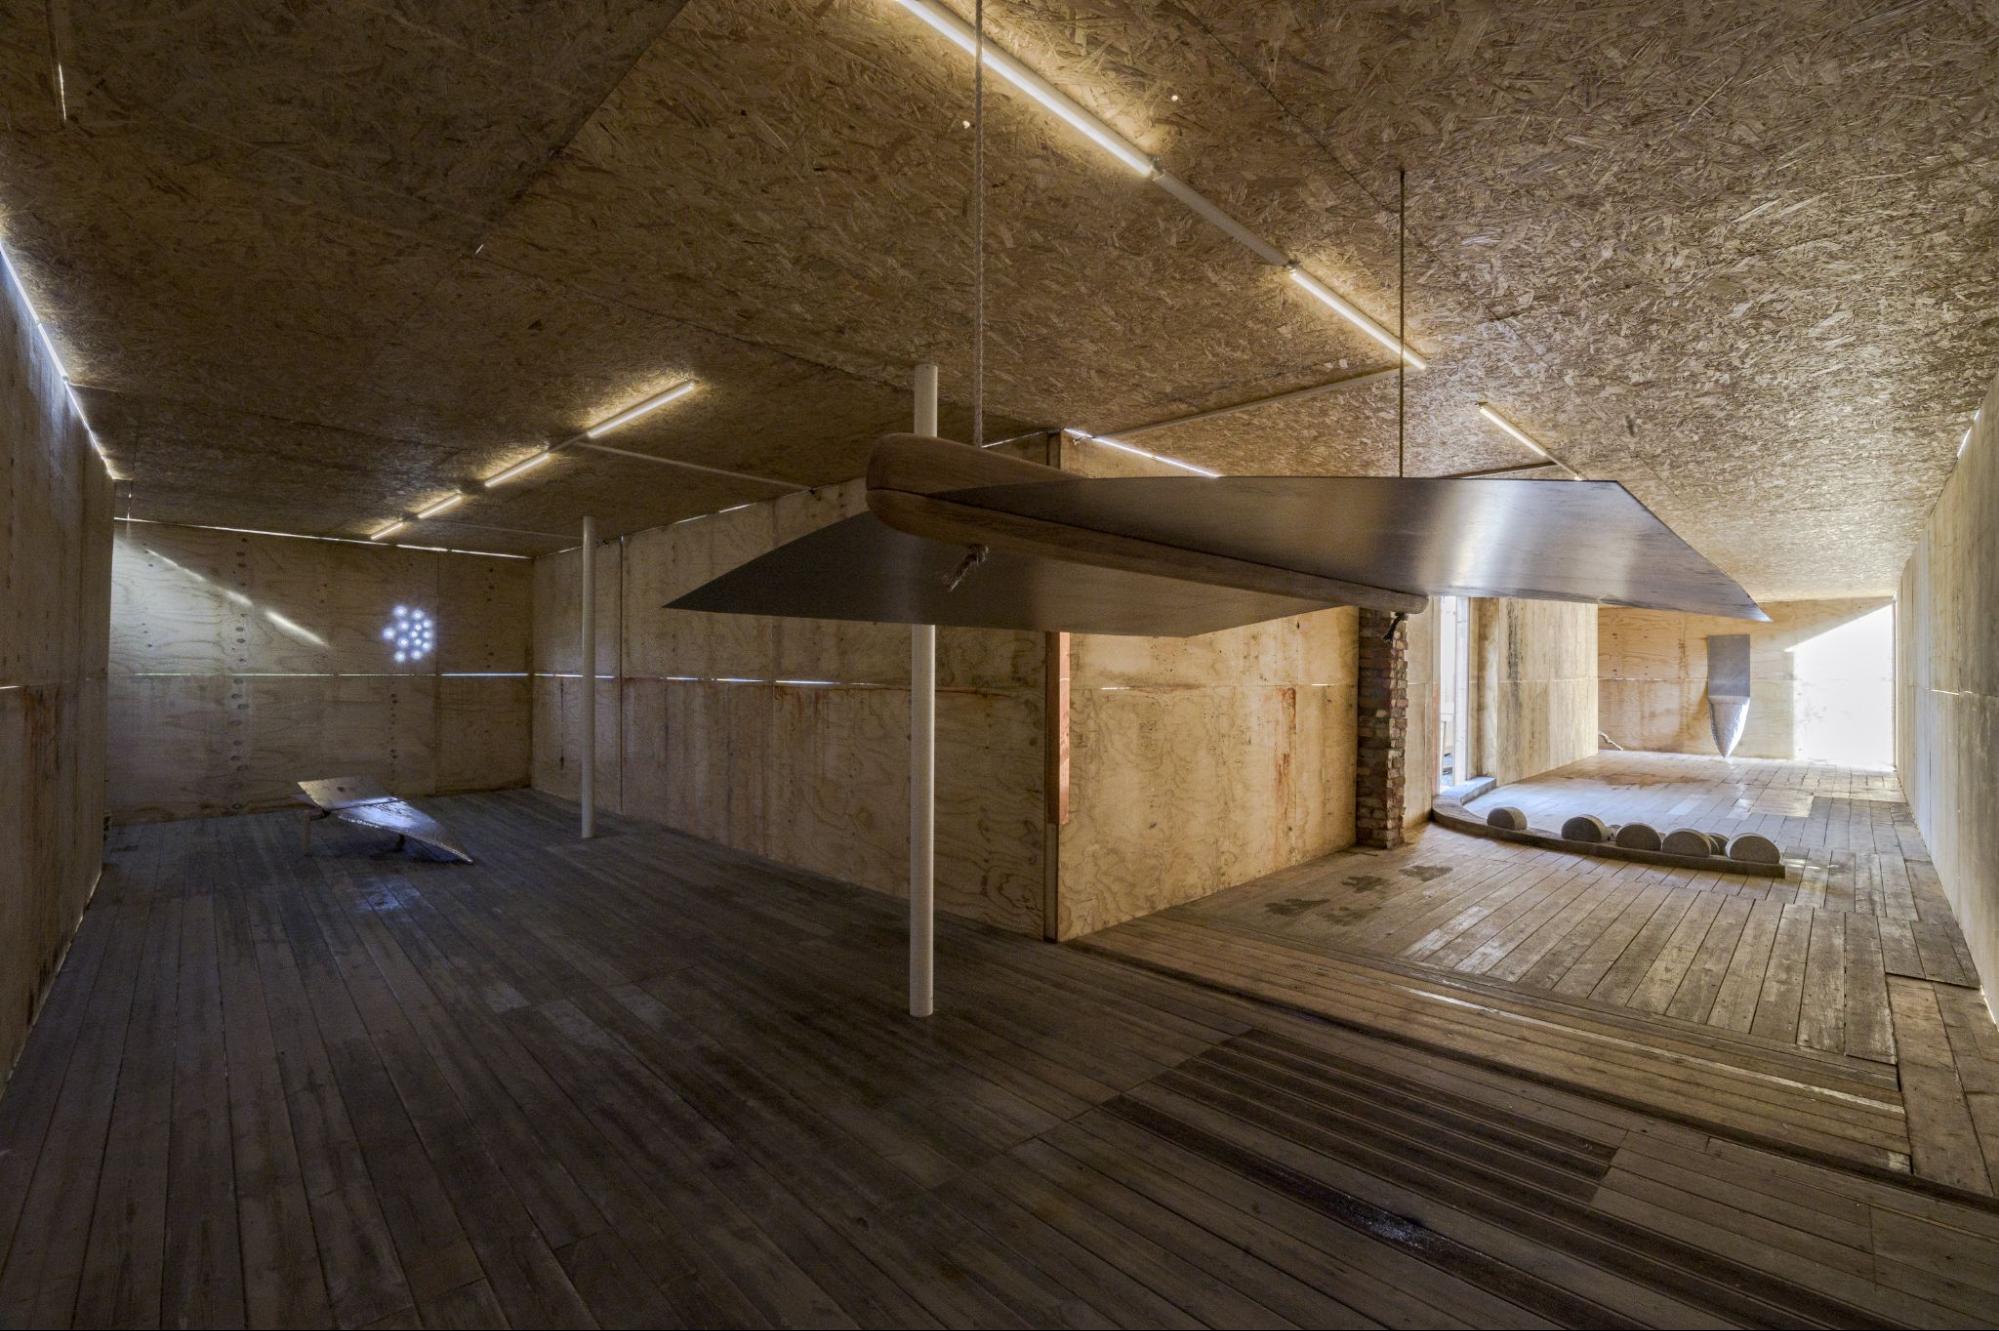 The image shows a room with fluorescent lighting, wooden floors, and plywood ceilings and walls. There are five sculptures exhibited in the space, fabricated with metal & brass, bricks, concrete, and ceramics.